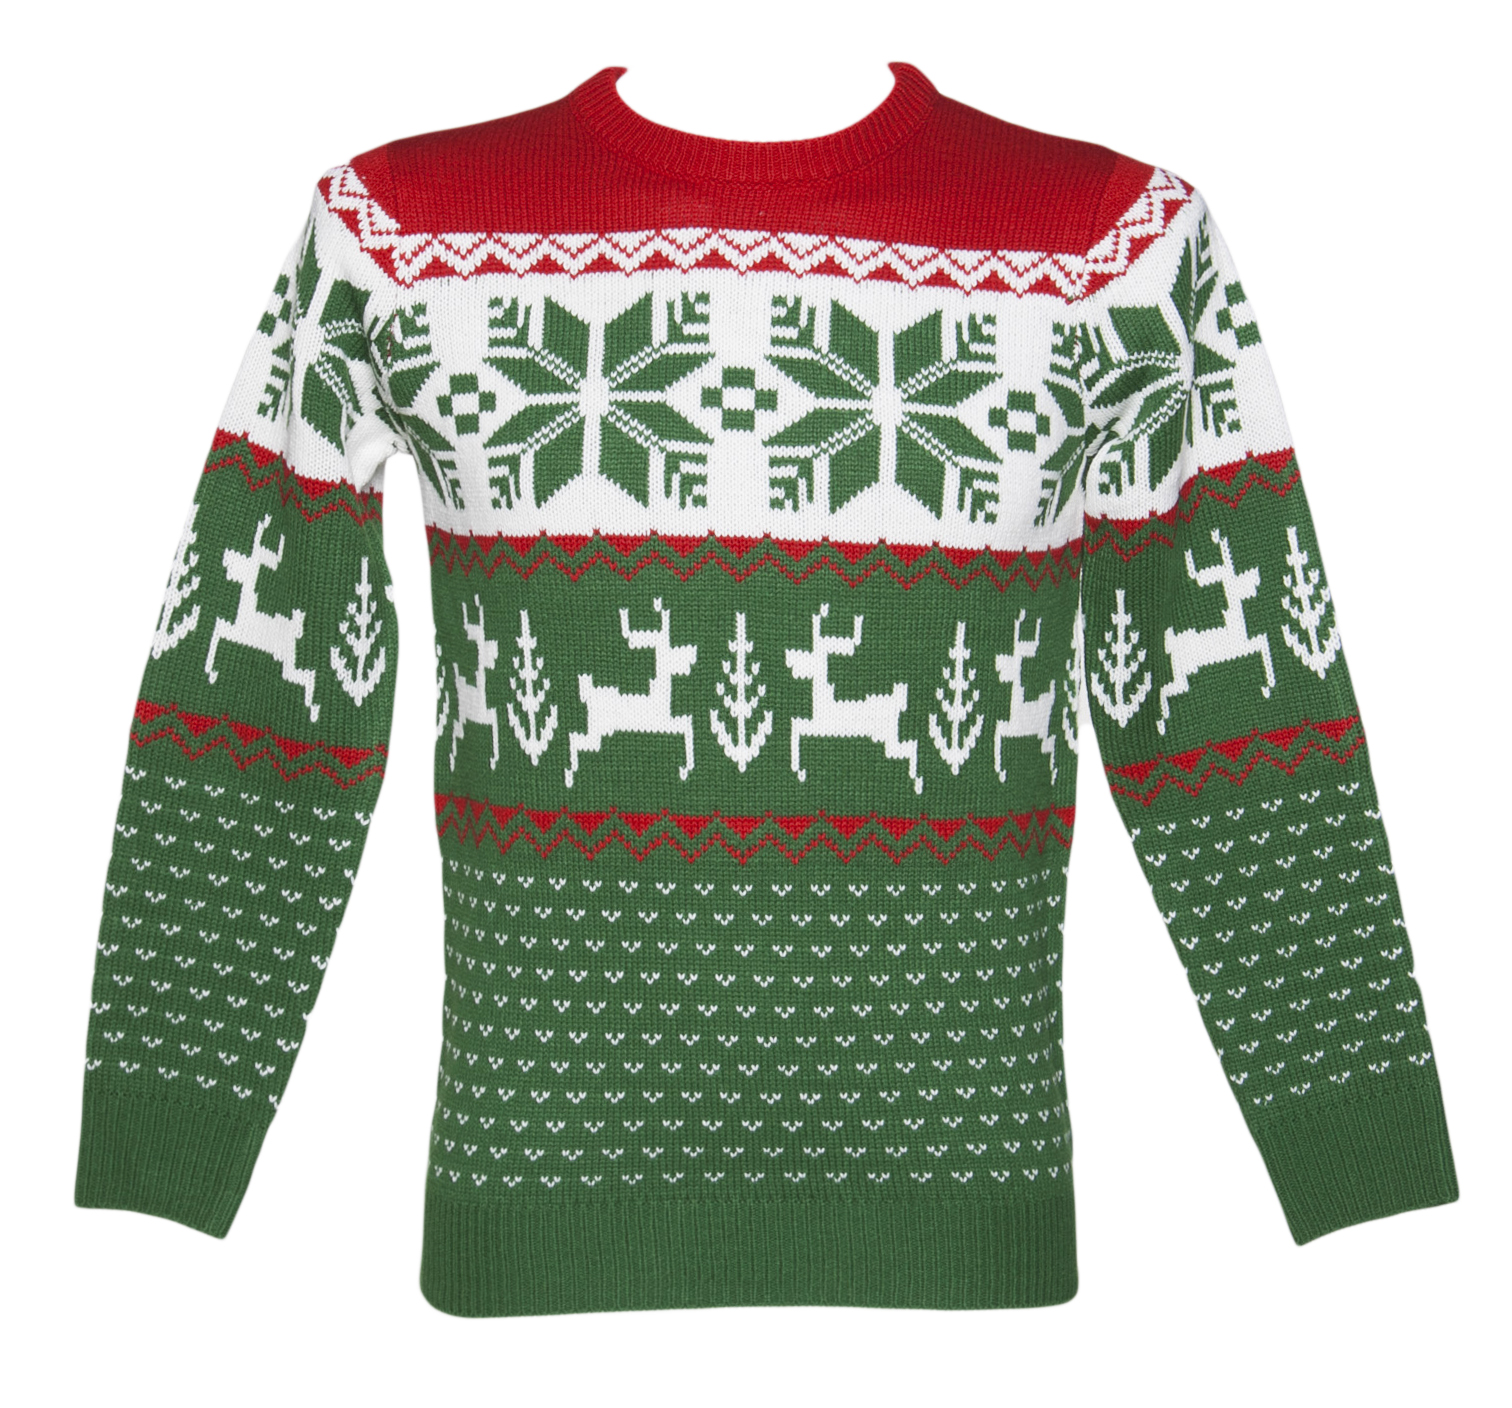 Cheesy Christmas Jumpers Unisex Green and Red Wonderland Knitted